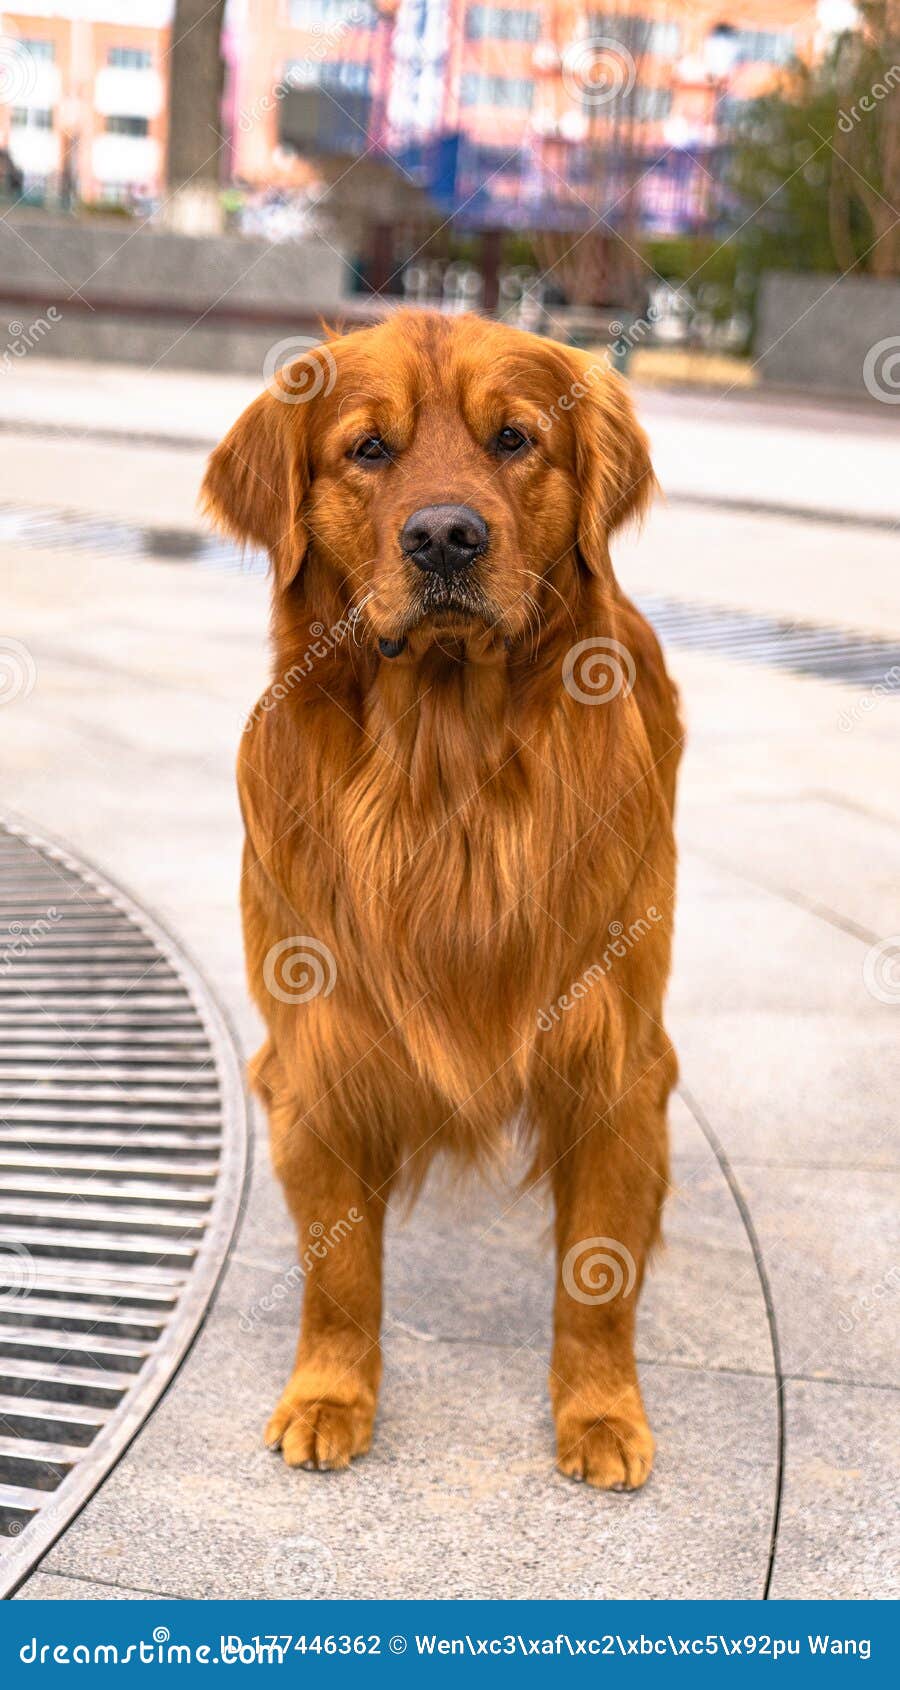 The Big Golden Hair in the Park Stock Photo - Image of beautiful, puppy:  177446362